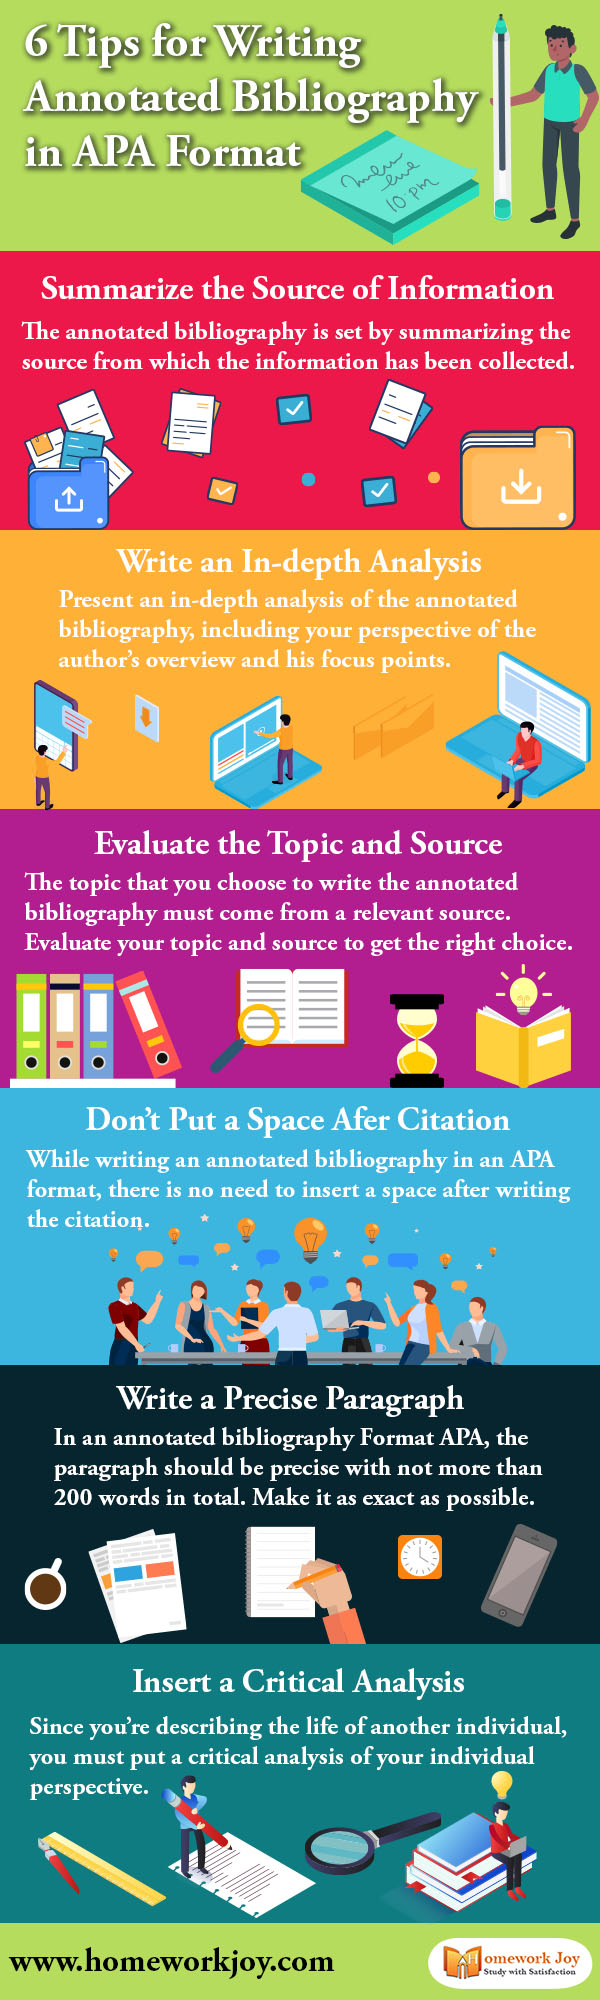 6 Tips for Writing Annotated Bibliography in APA Format